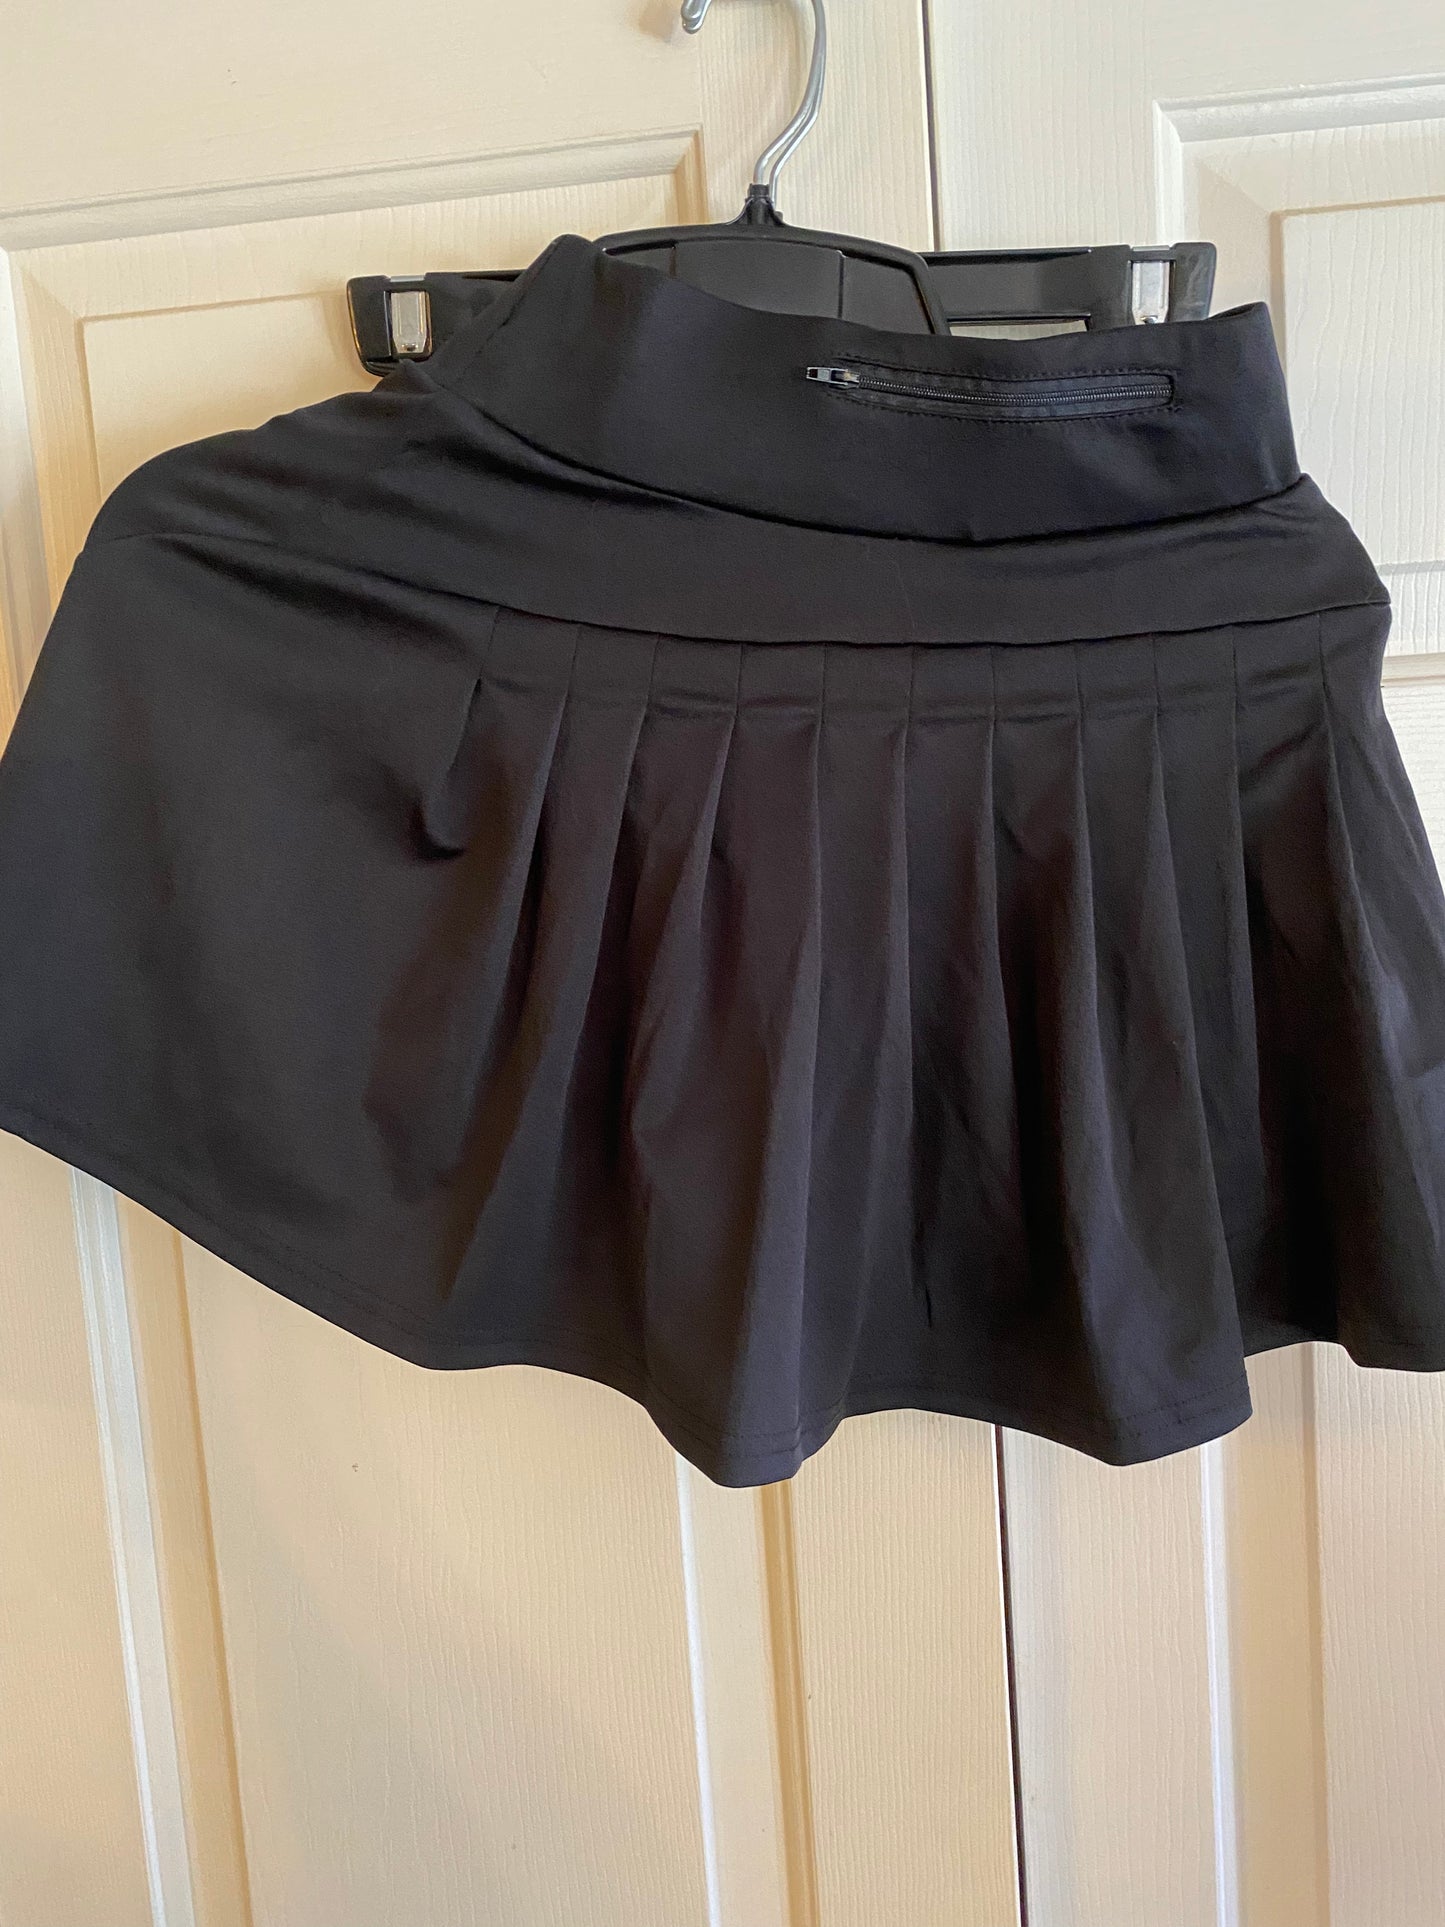 NWOT Werena Swimsuit Skirt Bottom Black Solid Size Small (S)